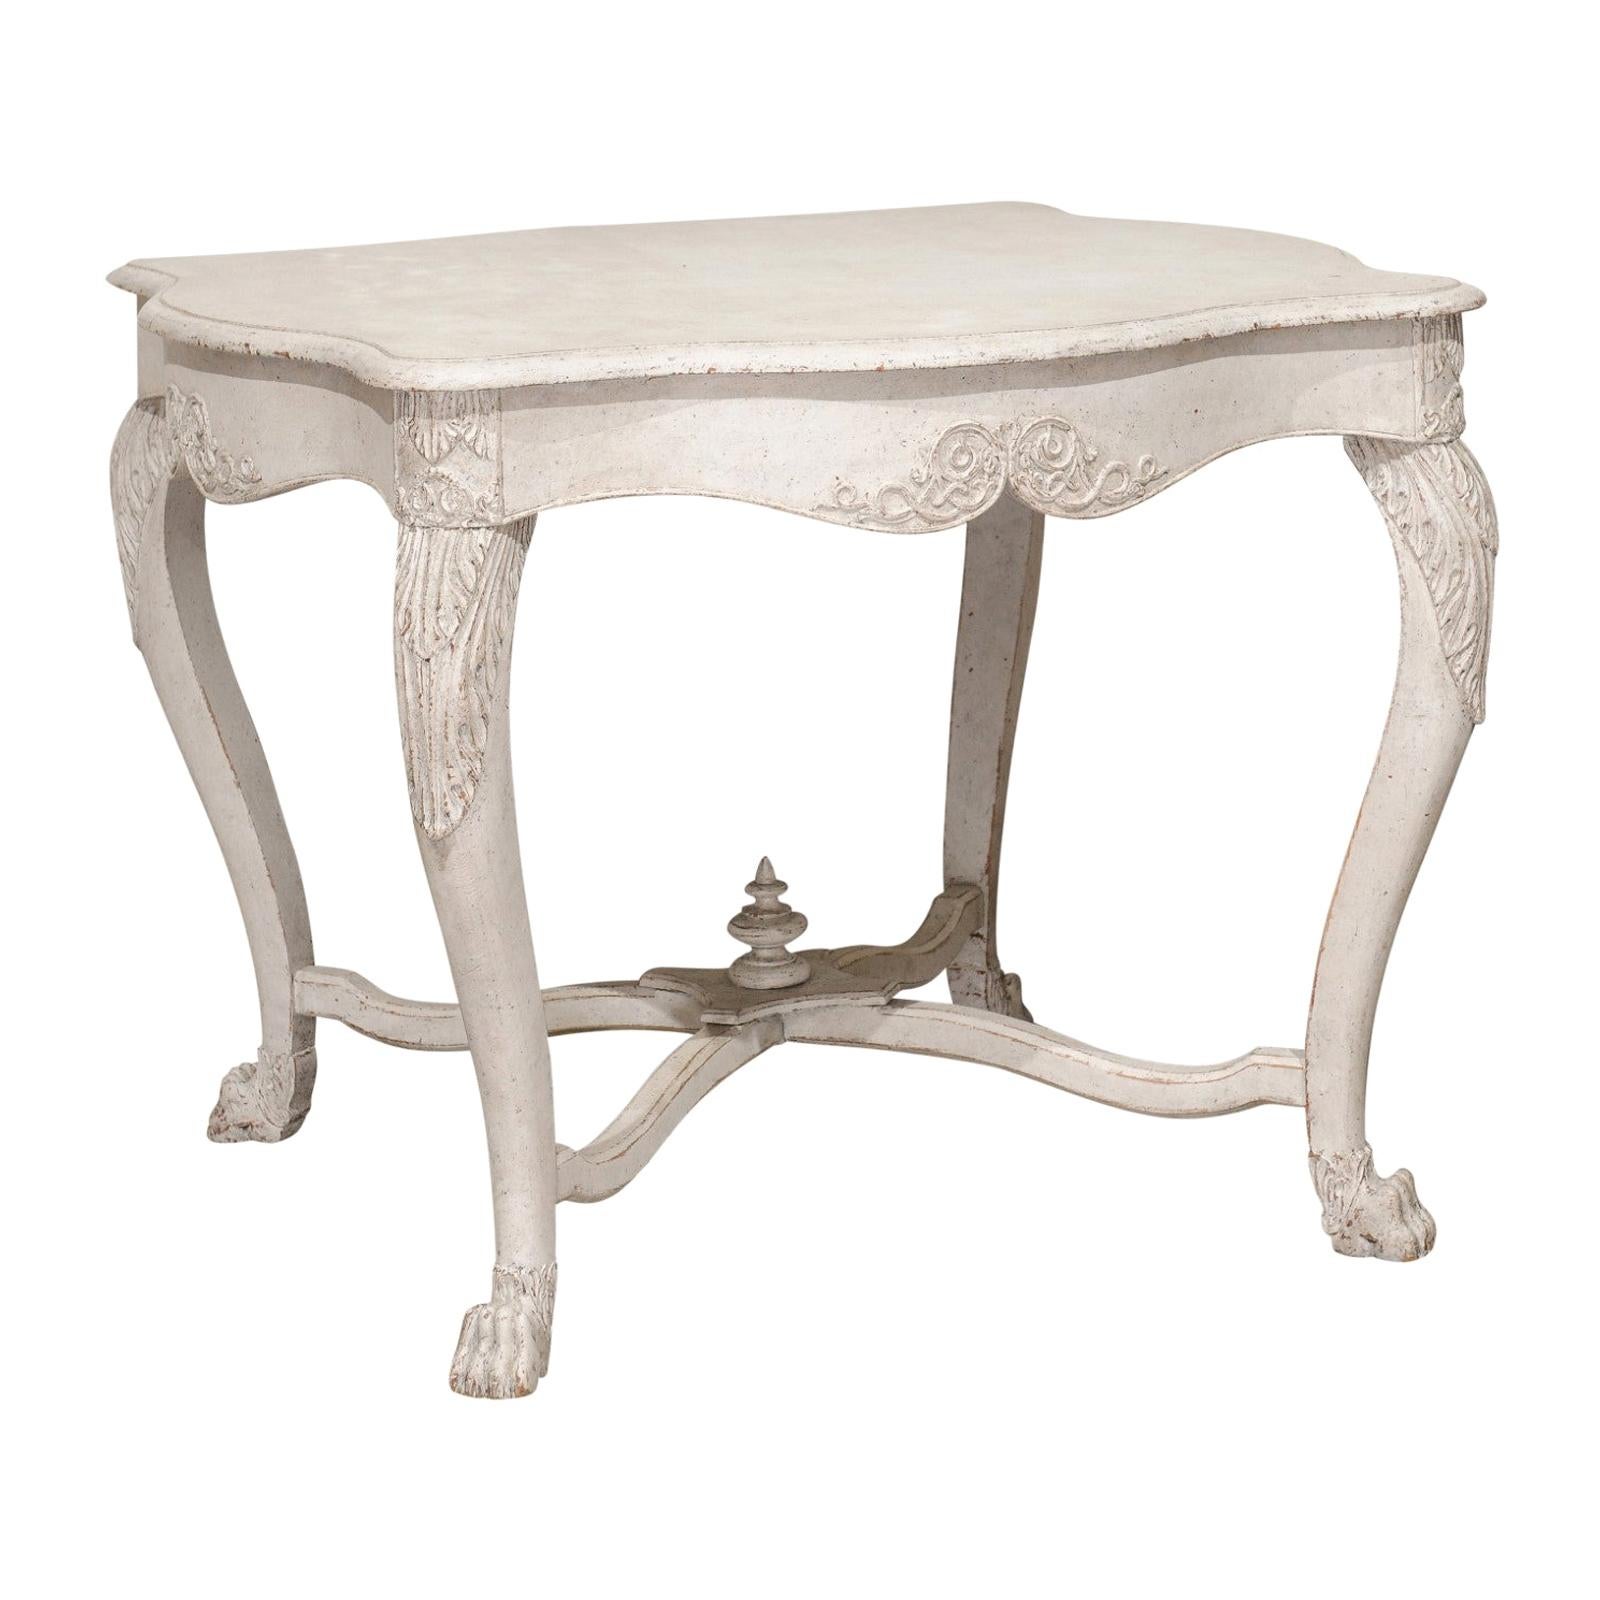 Swedish 1850s Painted Center Table with Carved Volutes and Cross Stretcher